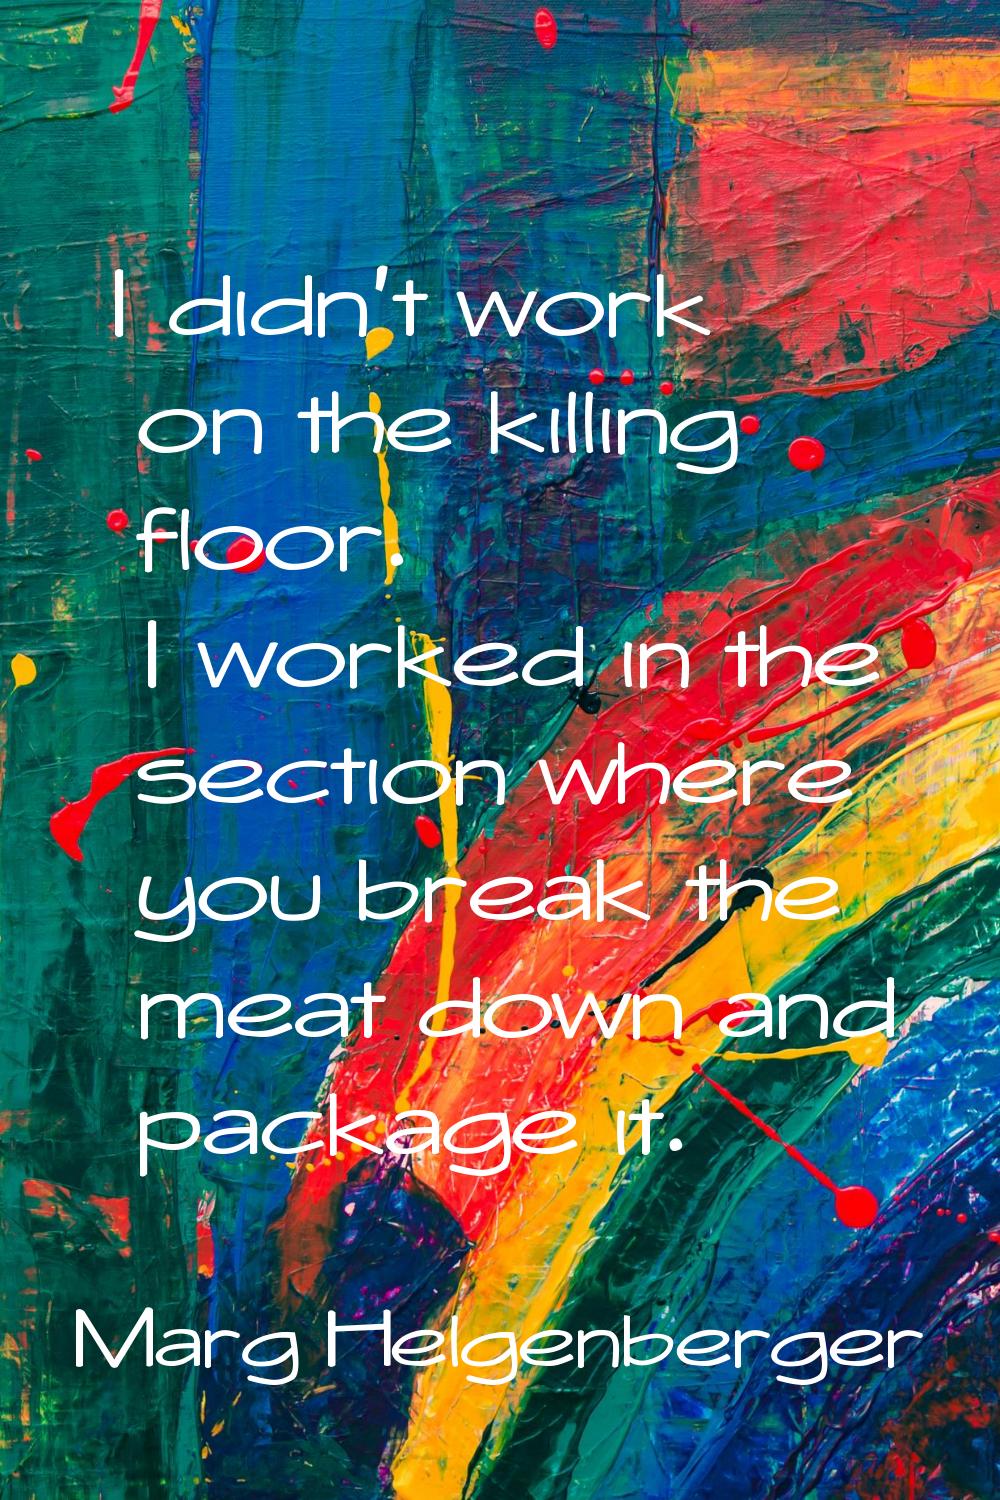 I didn't work on the killing floor. I worked in the section where you break the meat down and packa